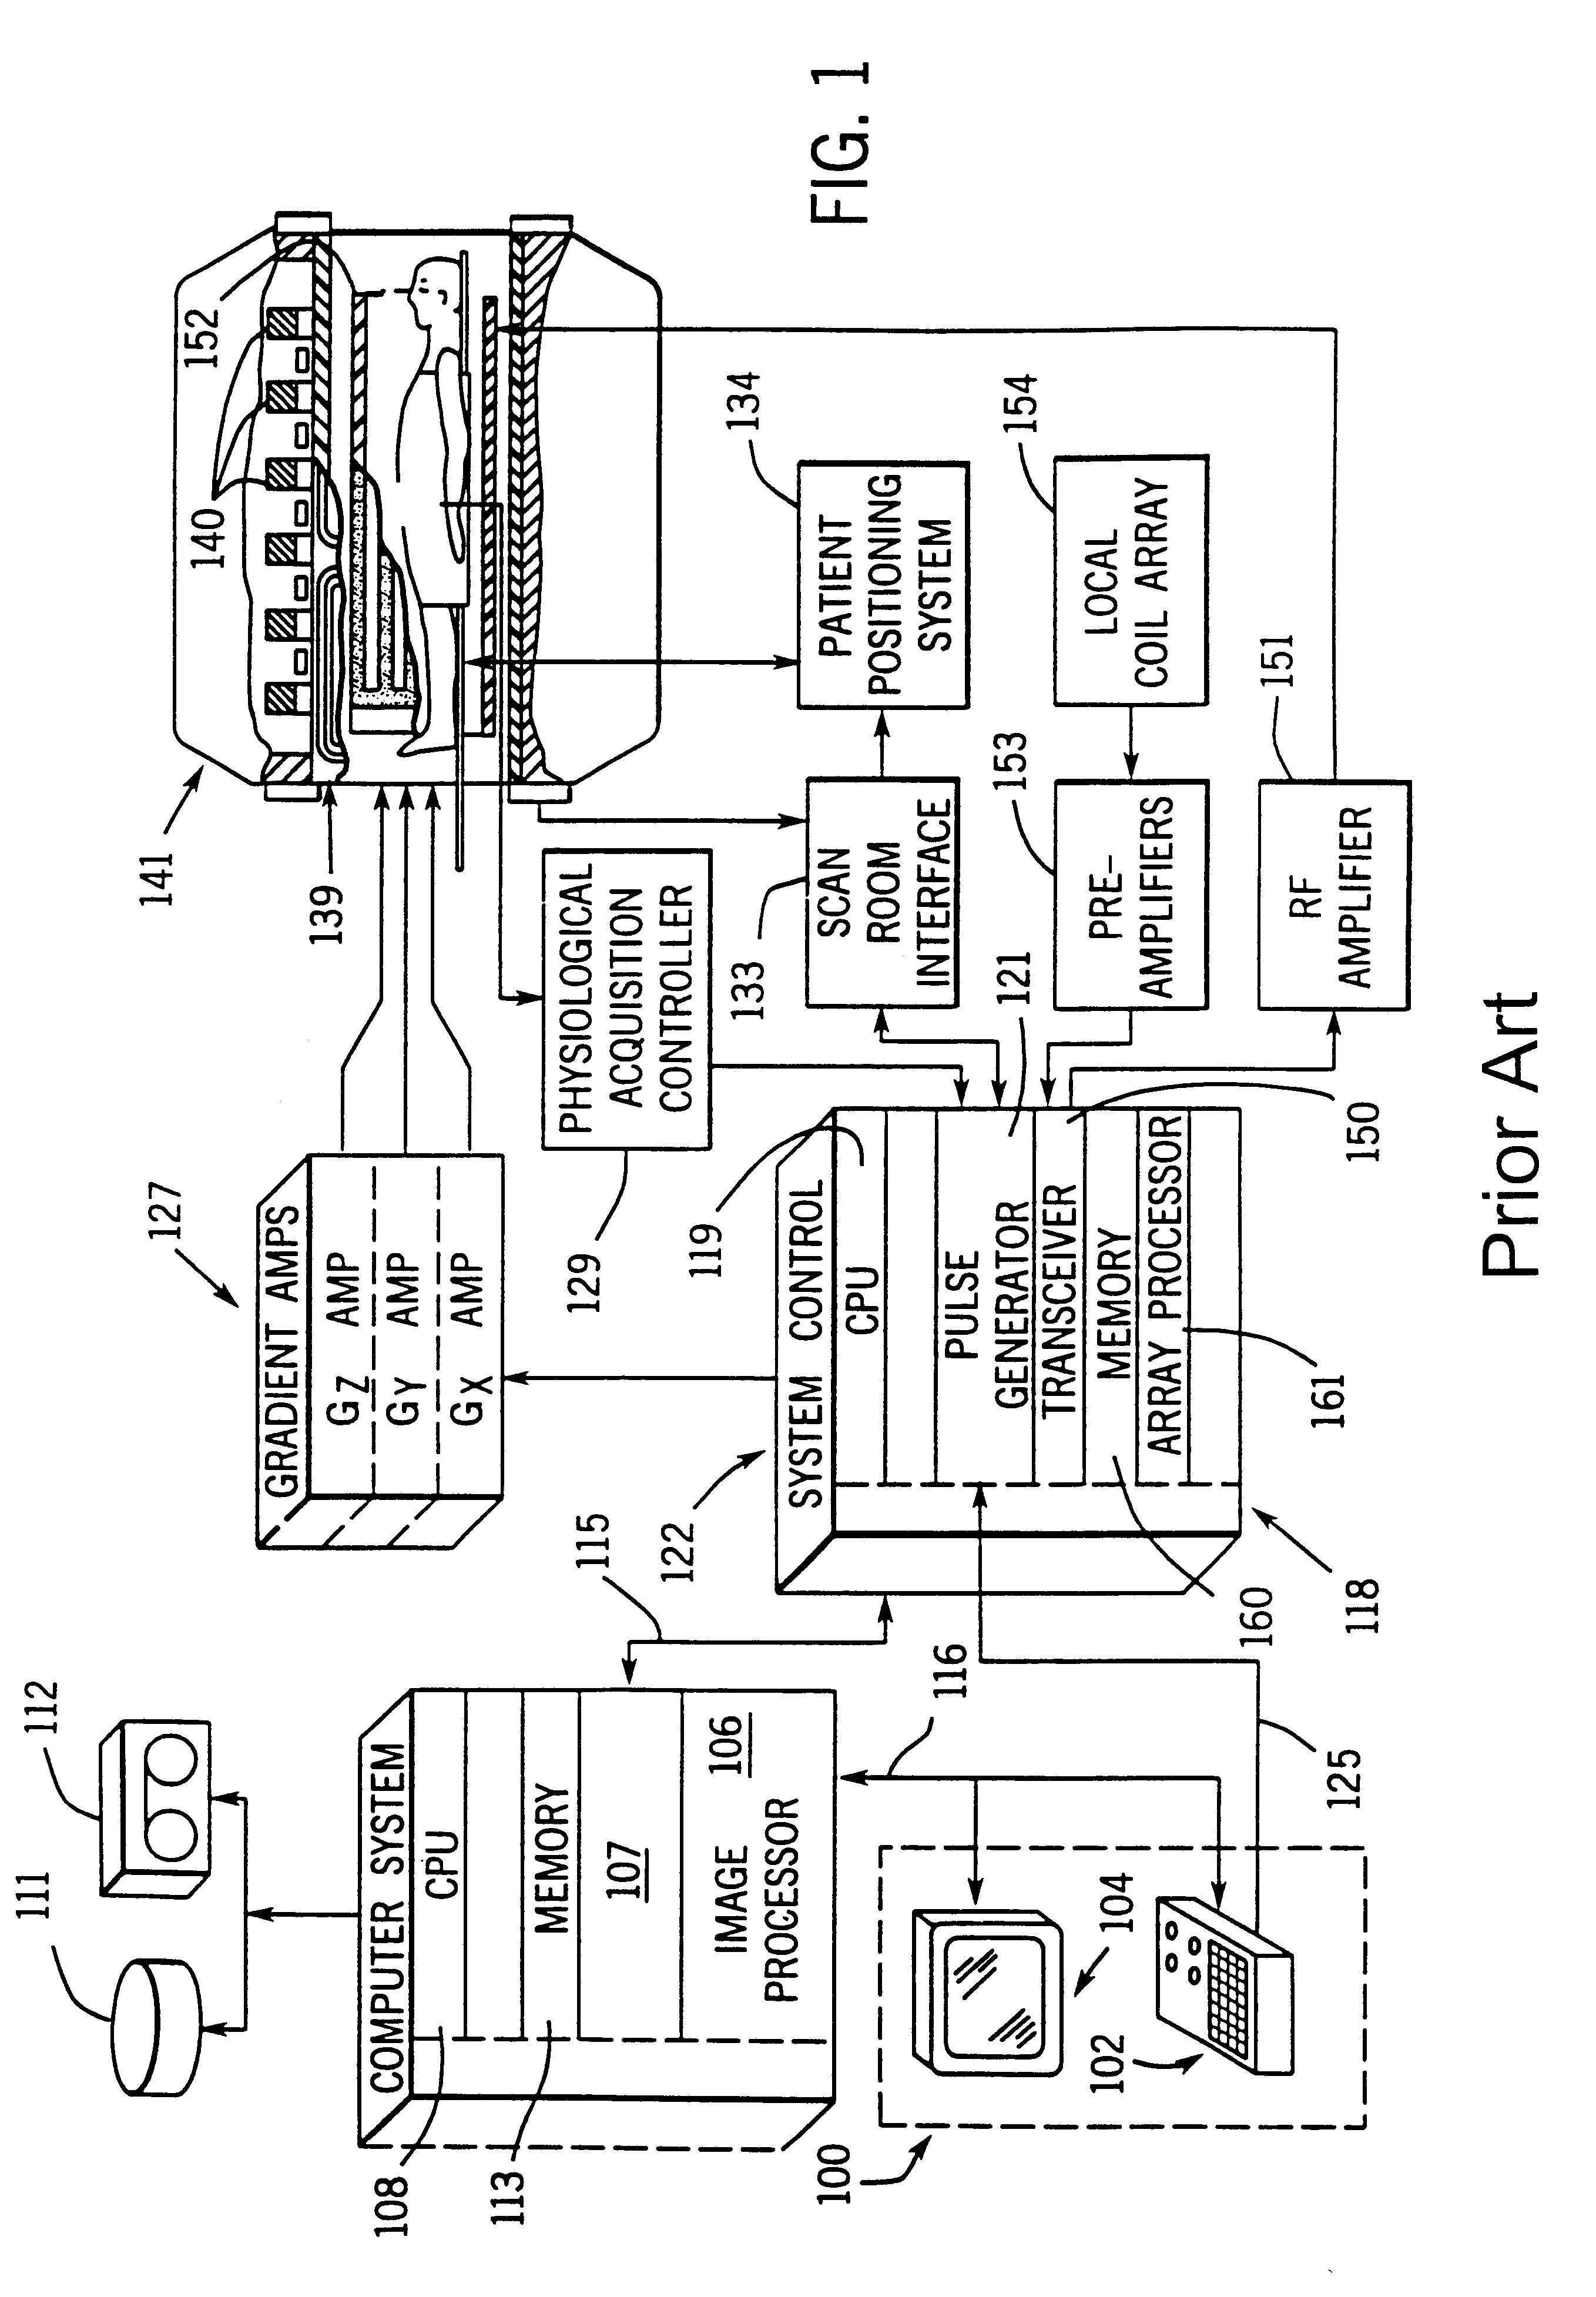 Method and apparatus for processing MRI data acquired with a plurality of coils using dixon techniques